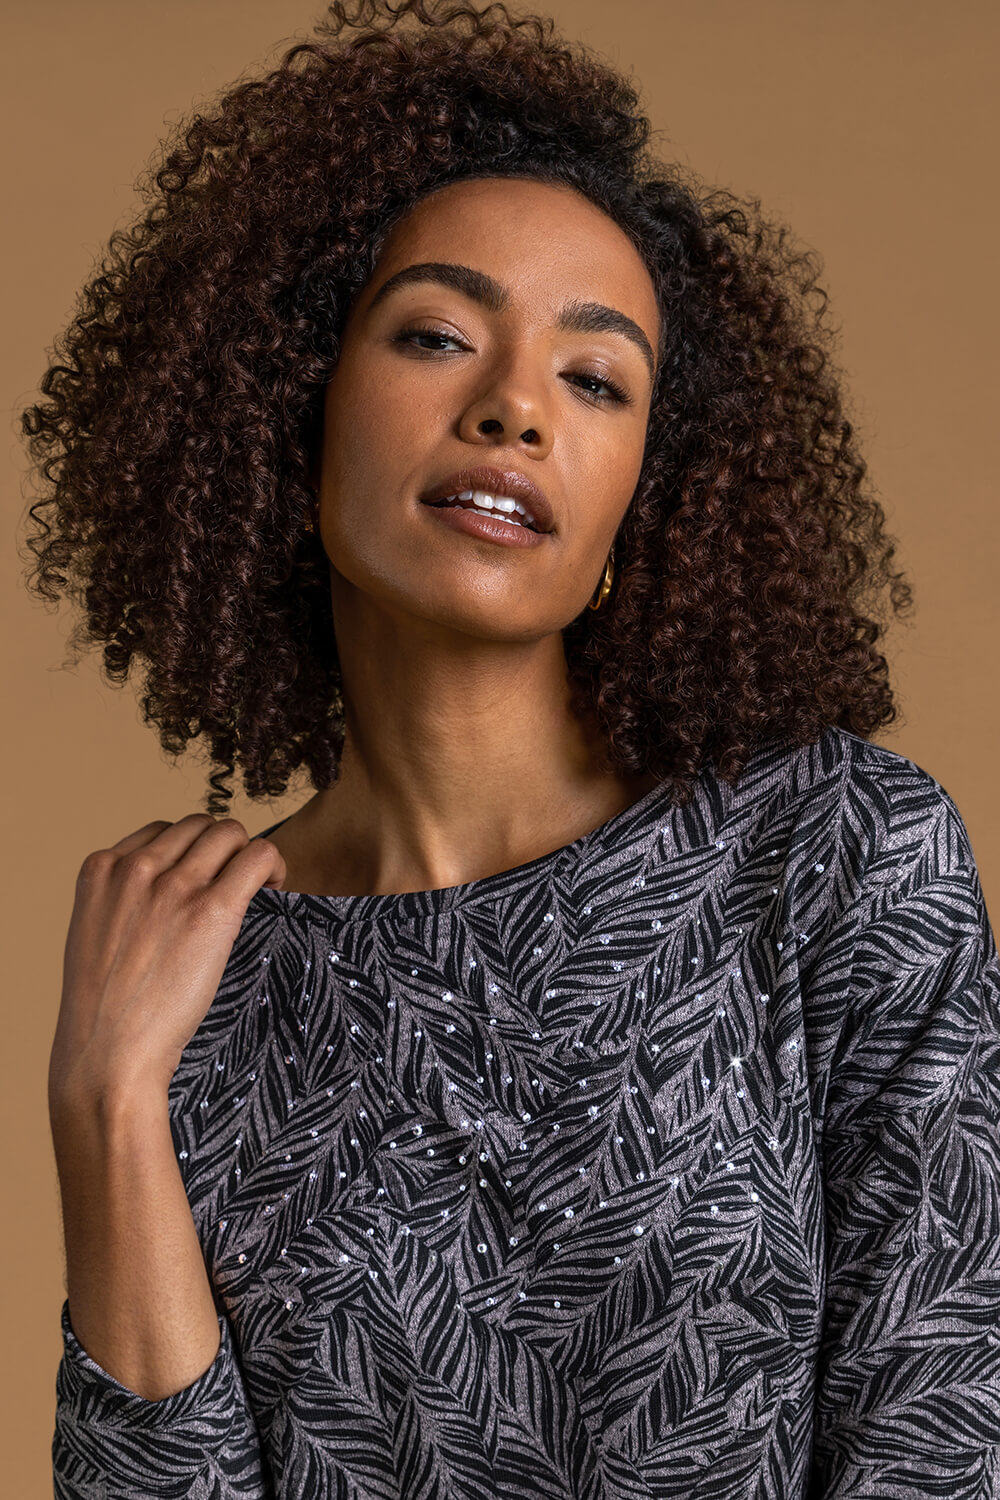 Black Embellished Feather Print Top, Image 2 of 5